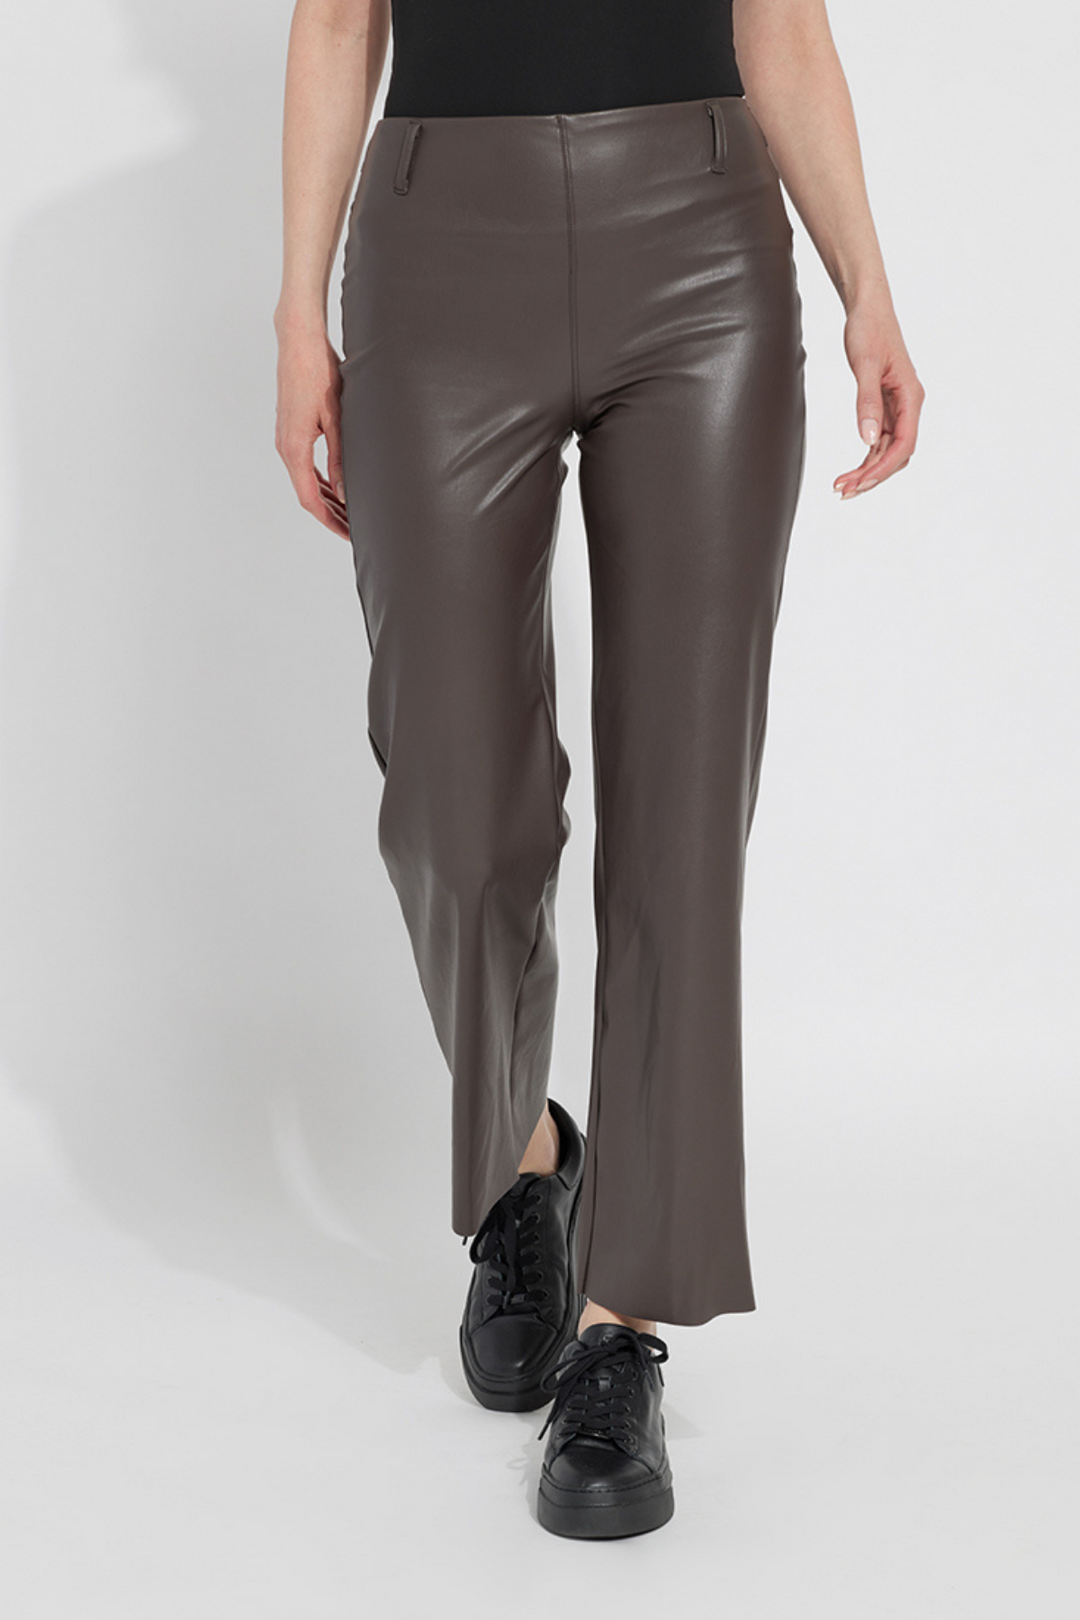 Lysse Shay Crushed Velvet Suit Pant – CAS curate.admire.style